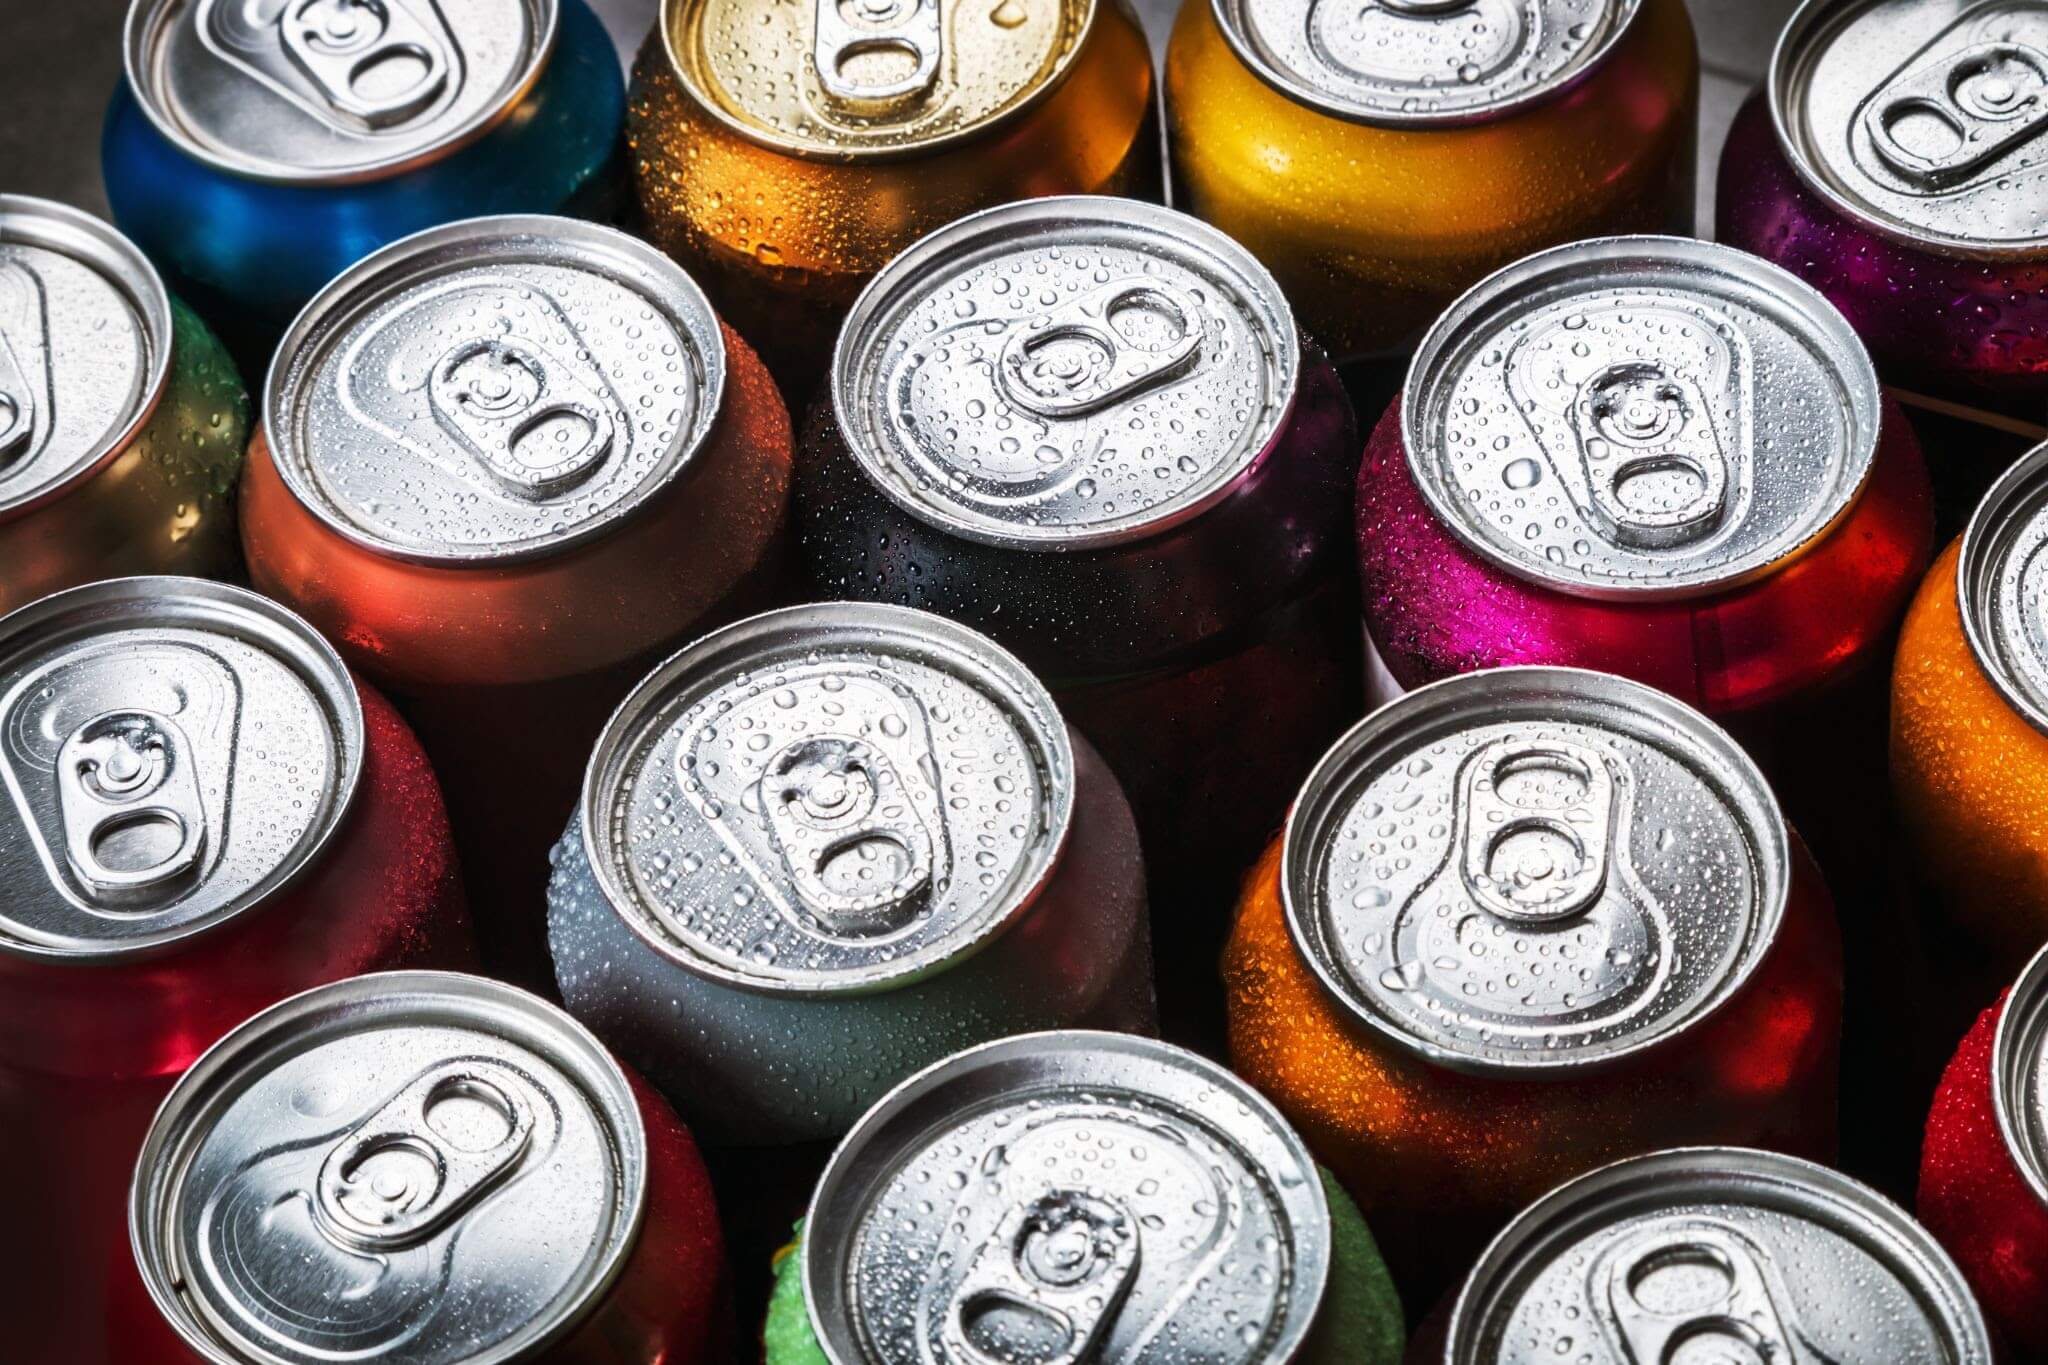 Sixteen cans of soda, shown from above so you can mostly only see the silver tops